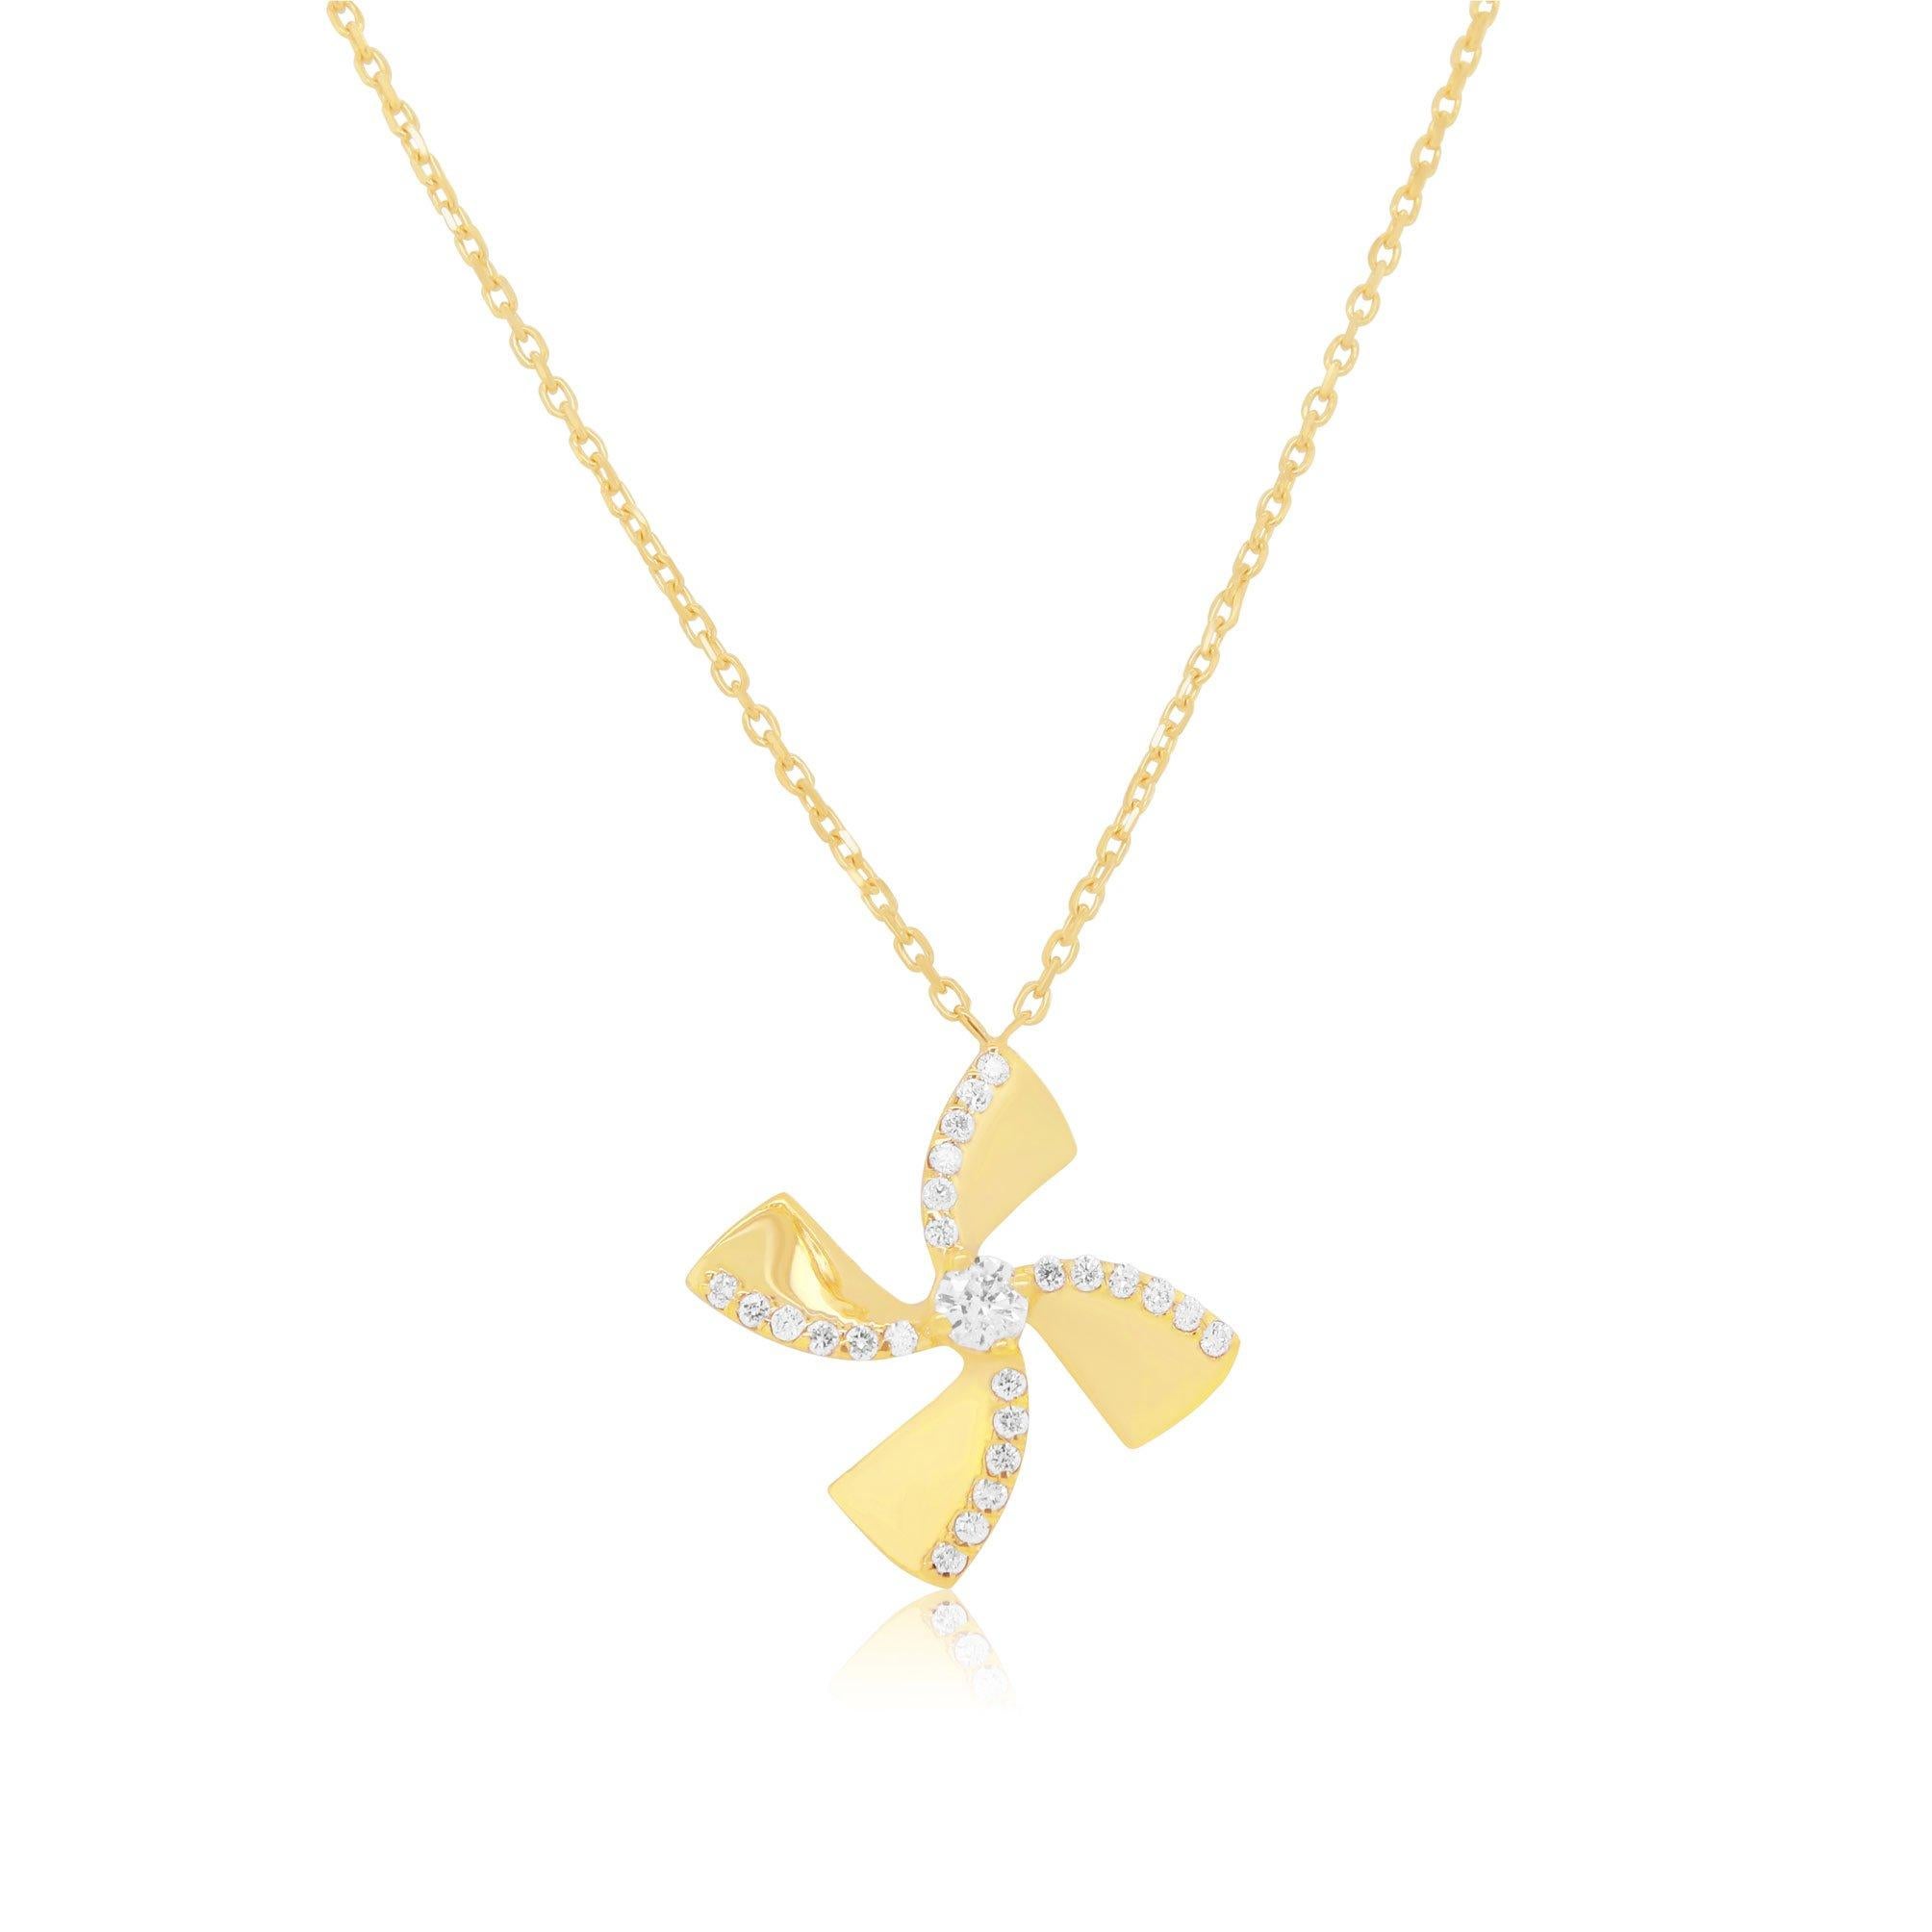 14K Yellow Gold 
0.48 Carats Total Weight of Round Brilliant White Diamonds
Color: H-I / Clarity: SI 
18-inch yellow gold chain included

Fine one-of-a-kind craftsmanship meets incredible quality in this breathtaking piece of jewelry.

All Alberto